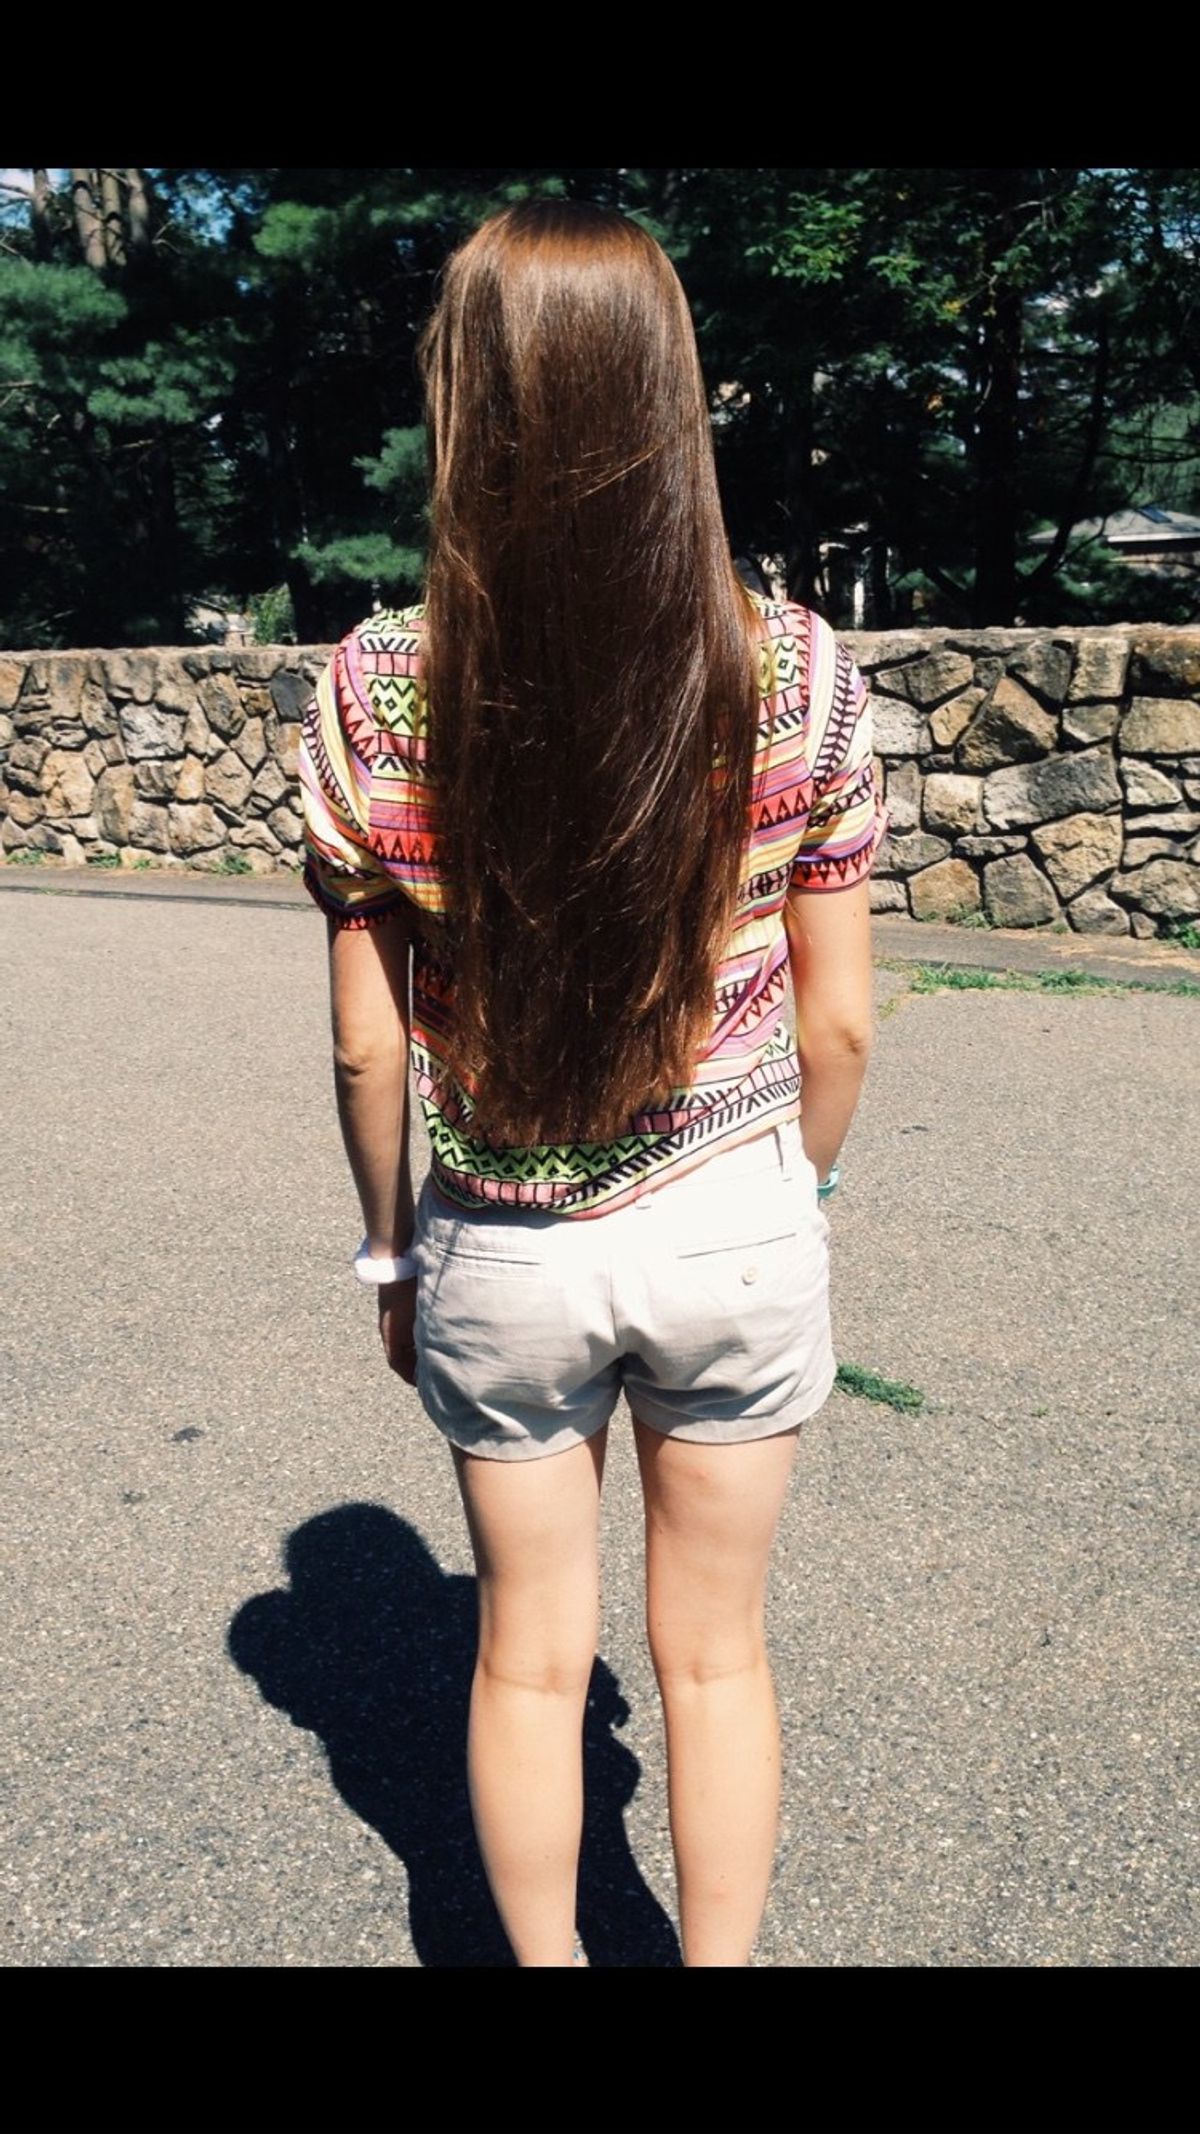 5 Things I Won't Miss About My Long Hair